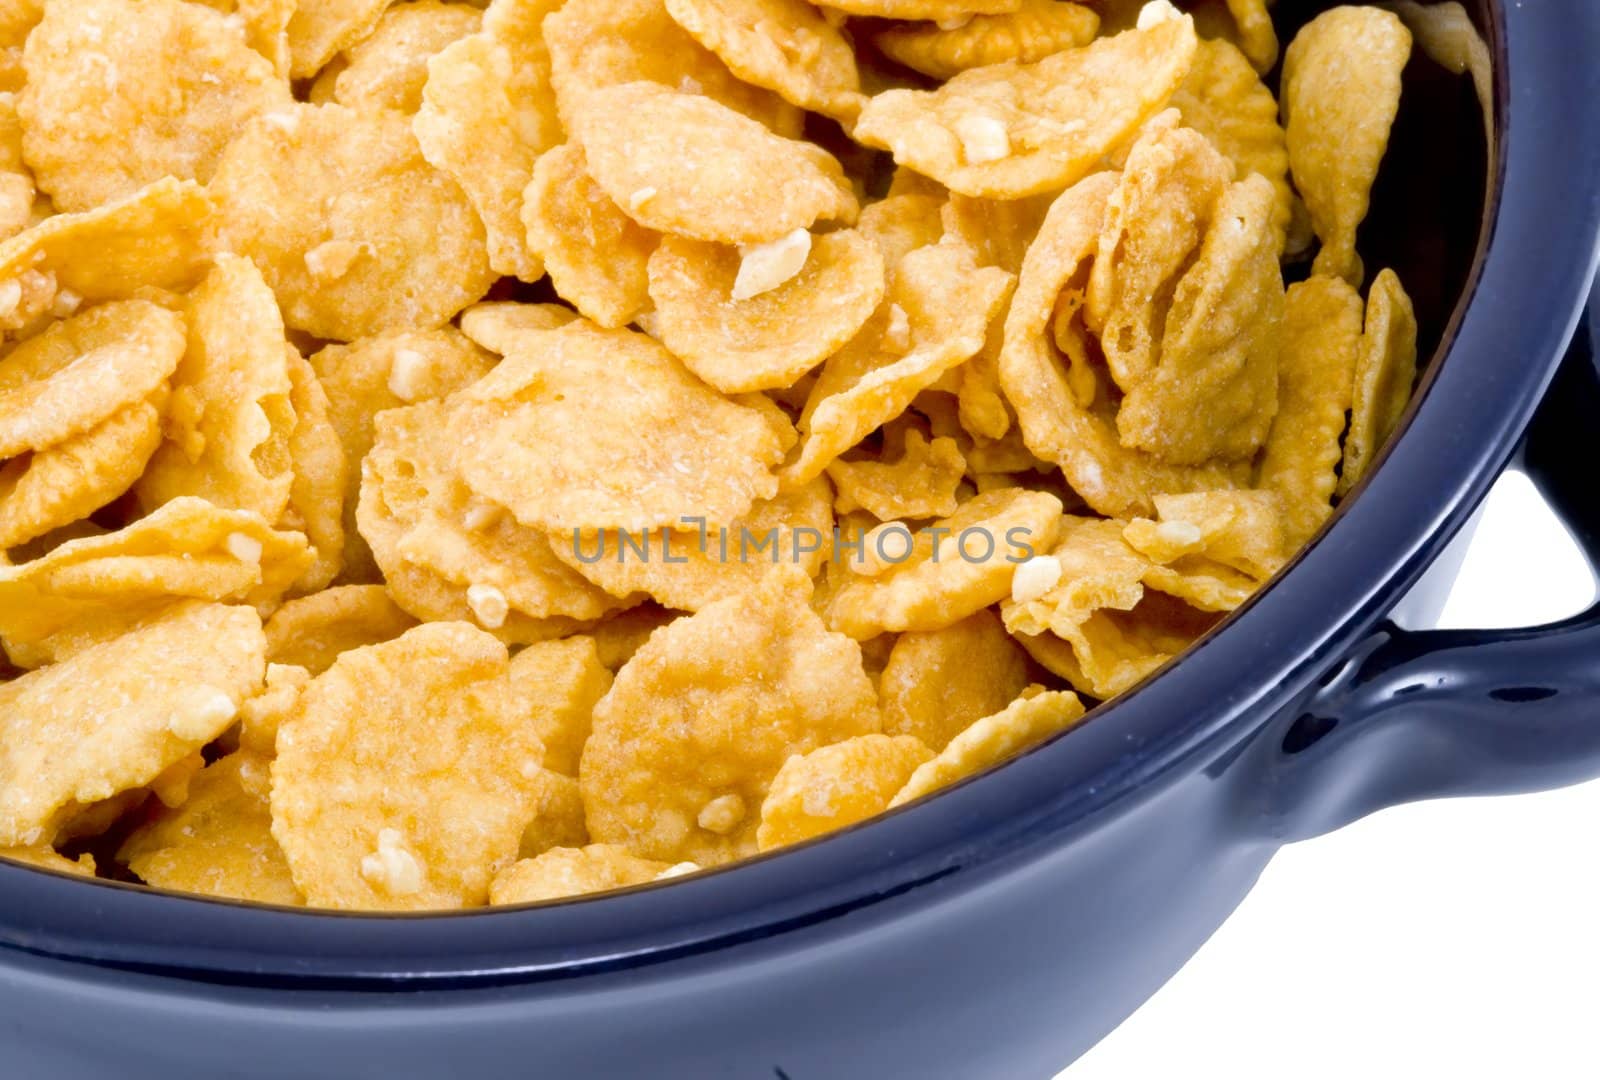 Bowl of Cornflakes by werg